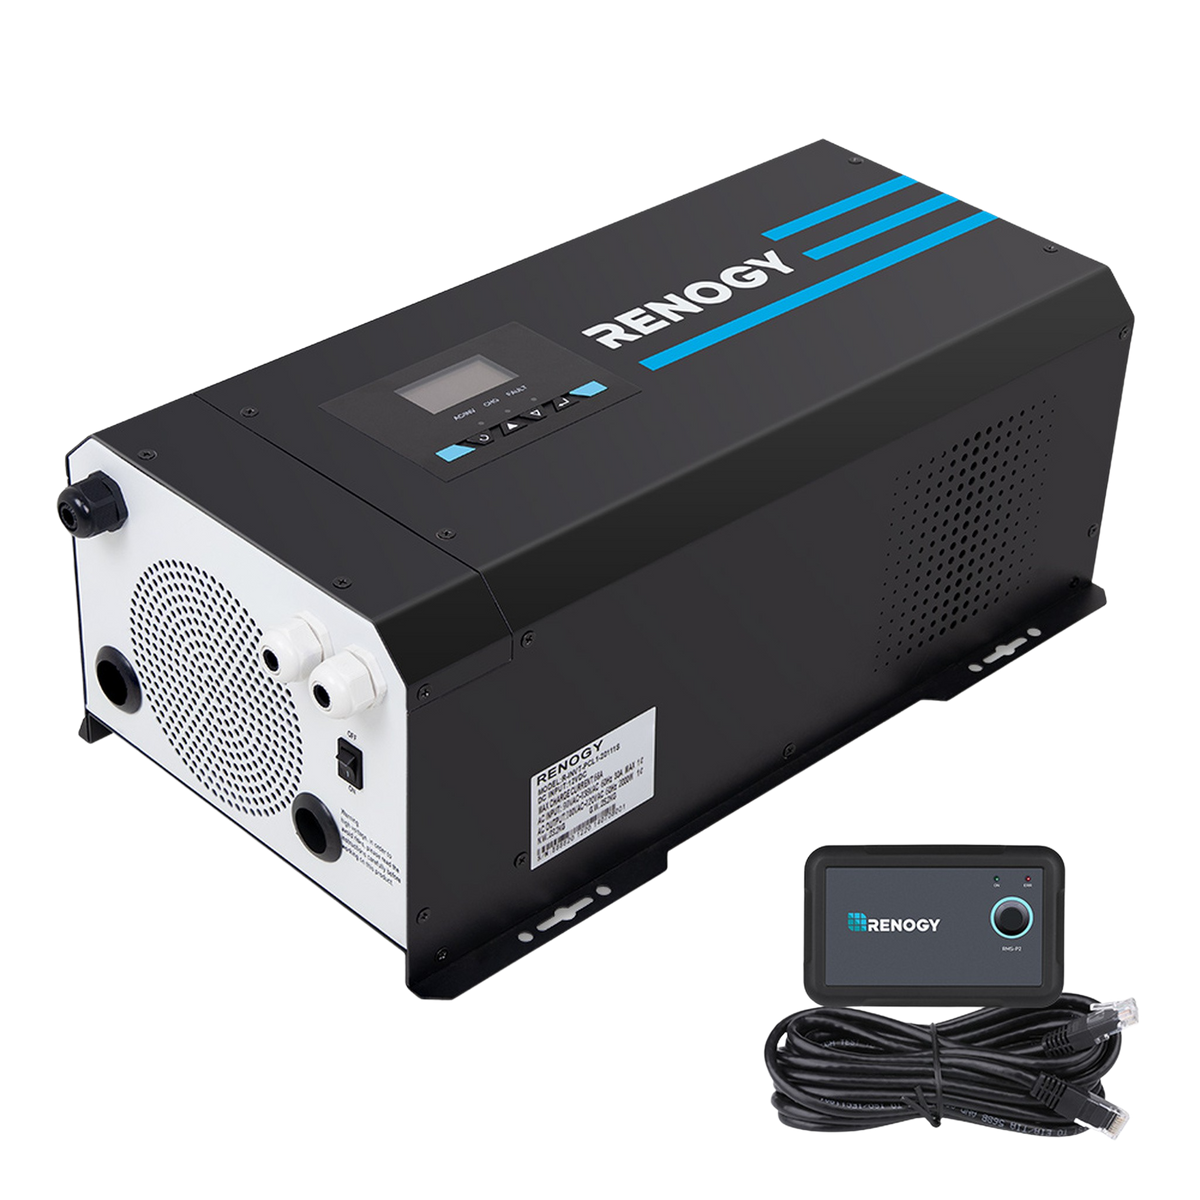 Renogy R-INVT-PCL1-20111S-US 2000W 12V Pure Sine Wave Inverter Charger w/ LCD Display New